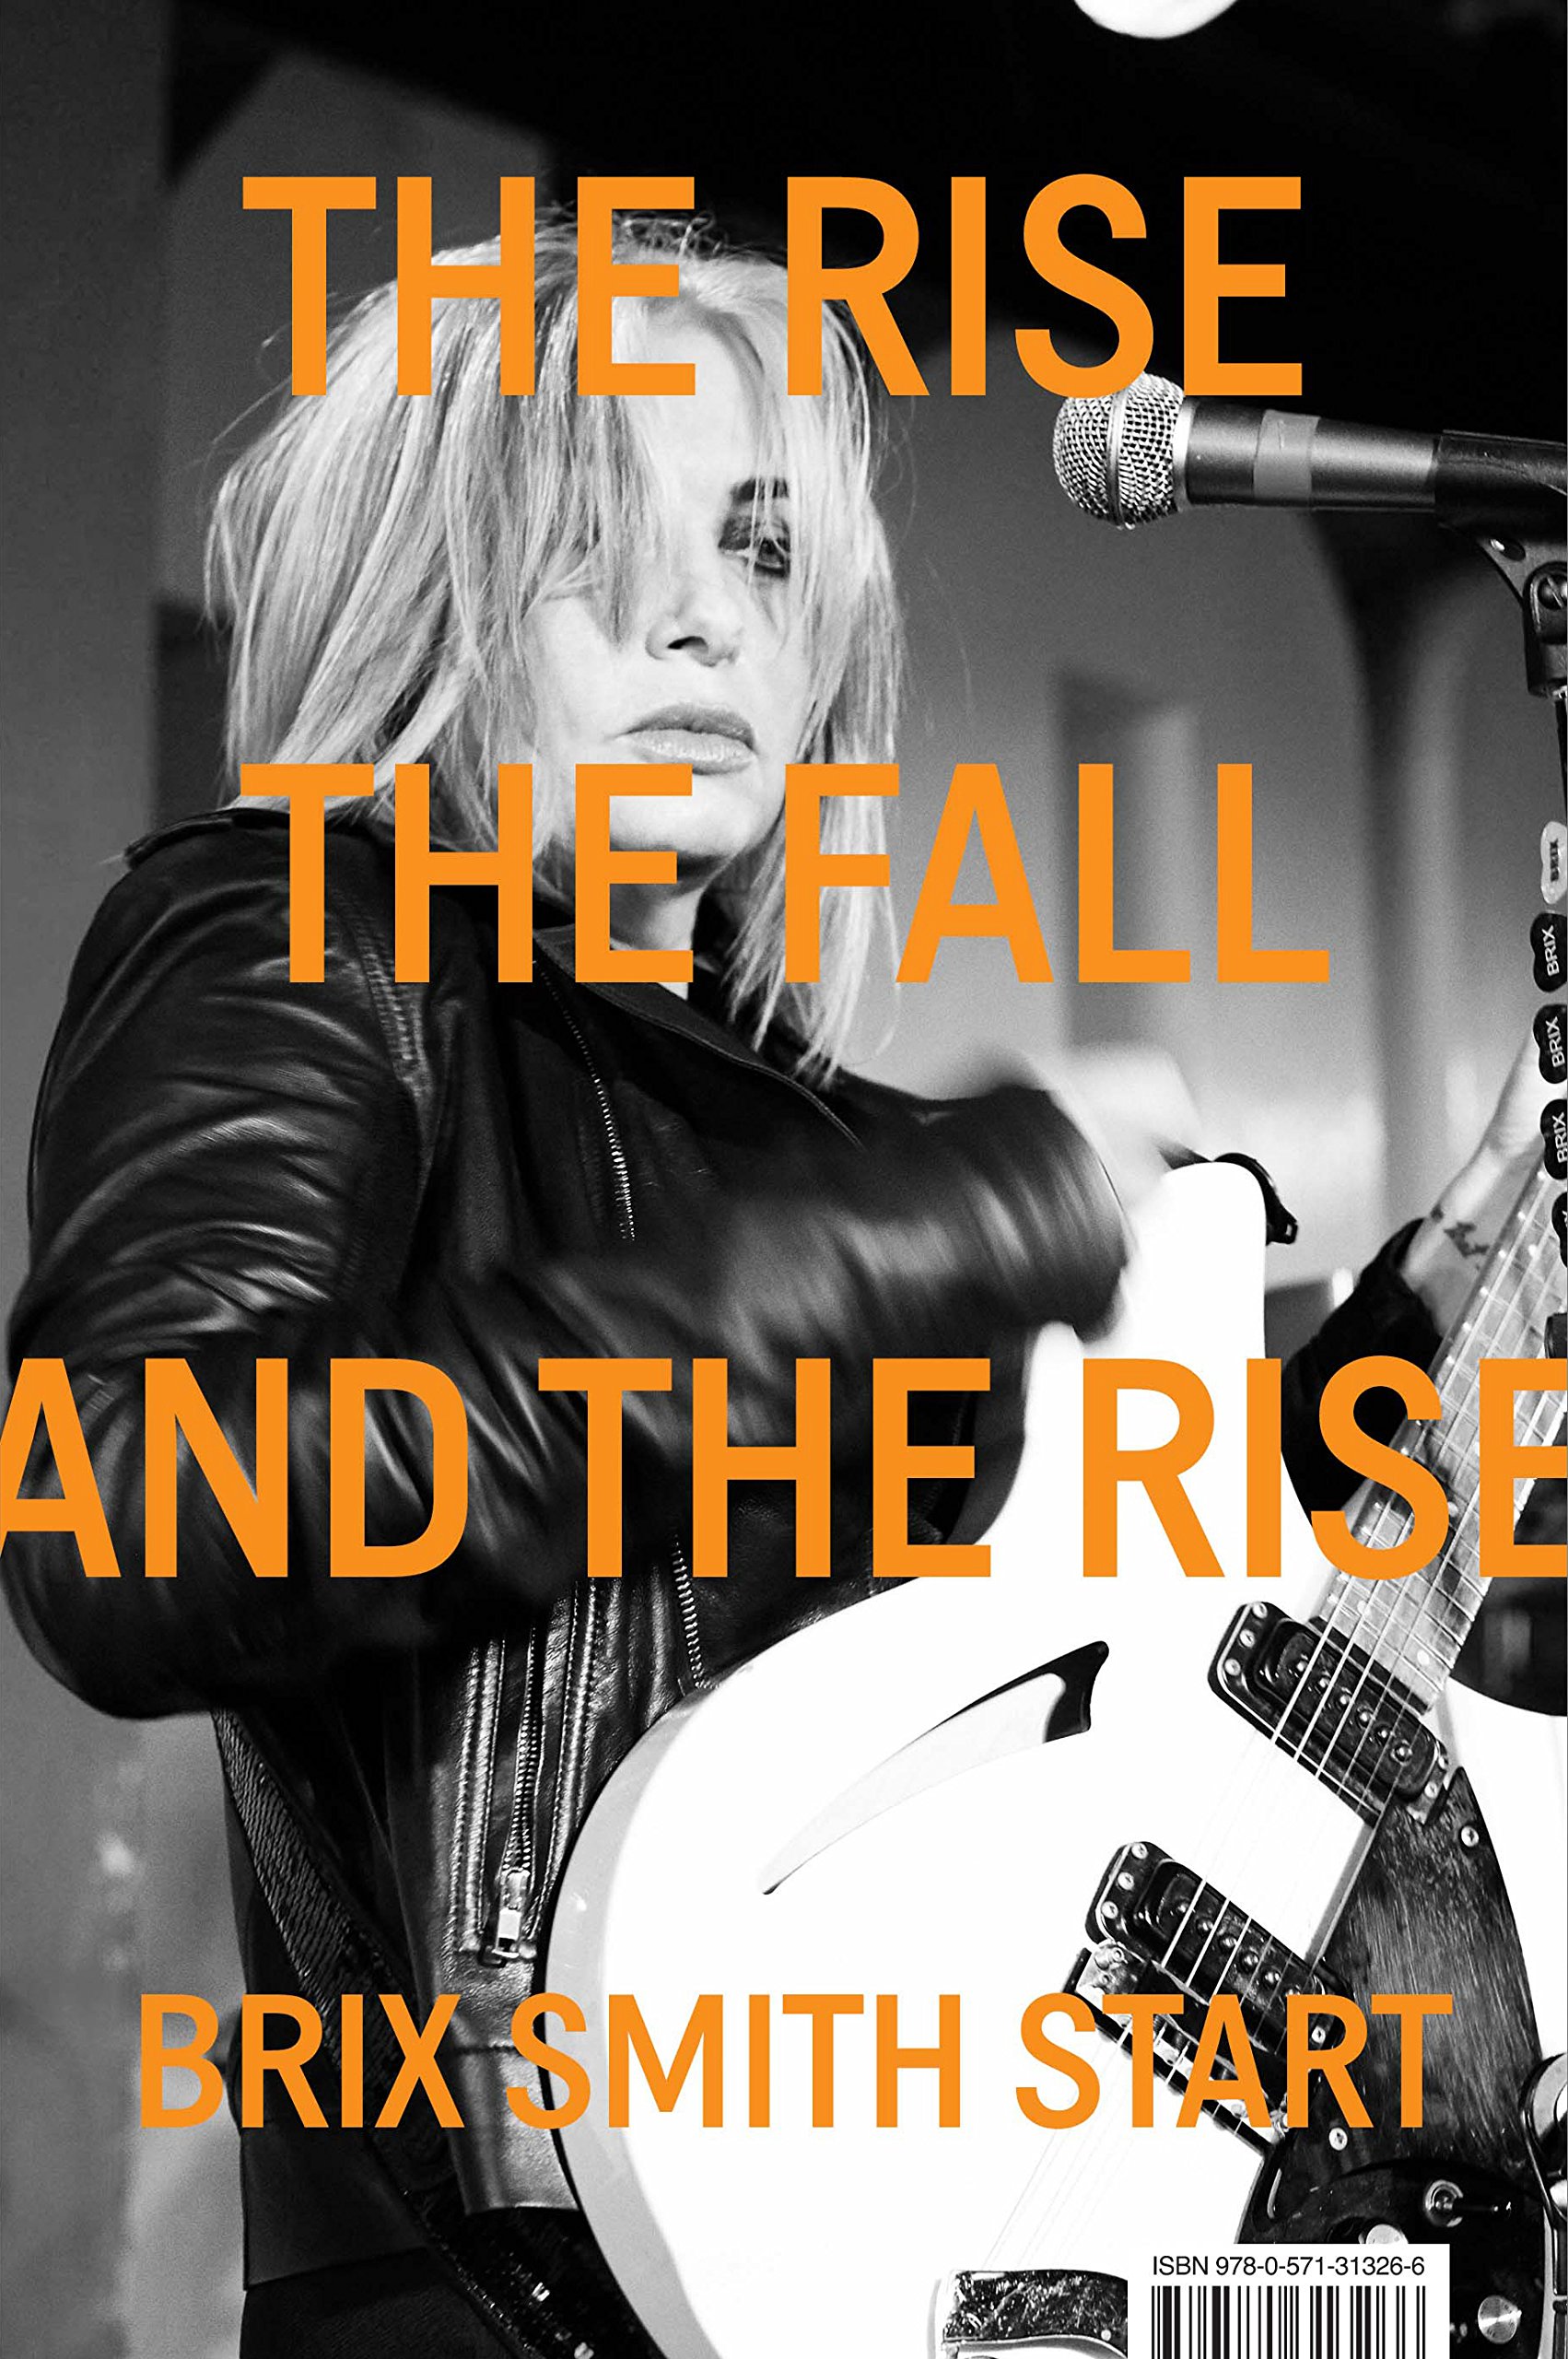 Tapa del libro «The Rise, The Fall and The Rise»